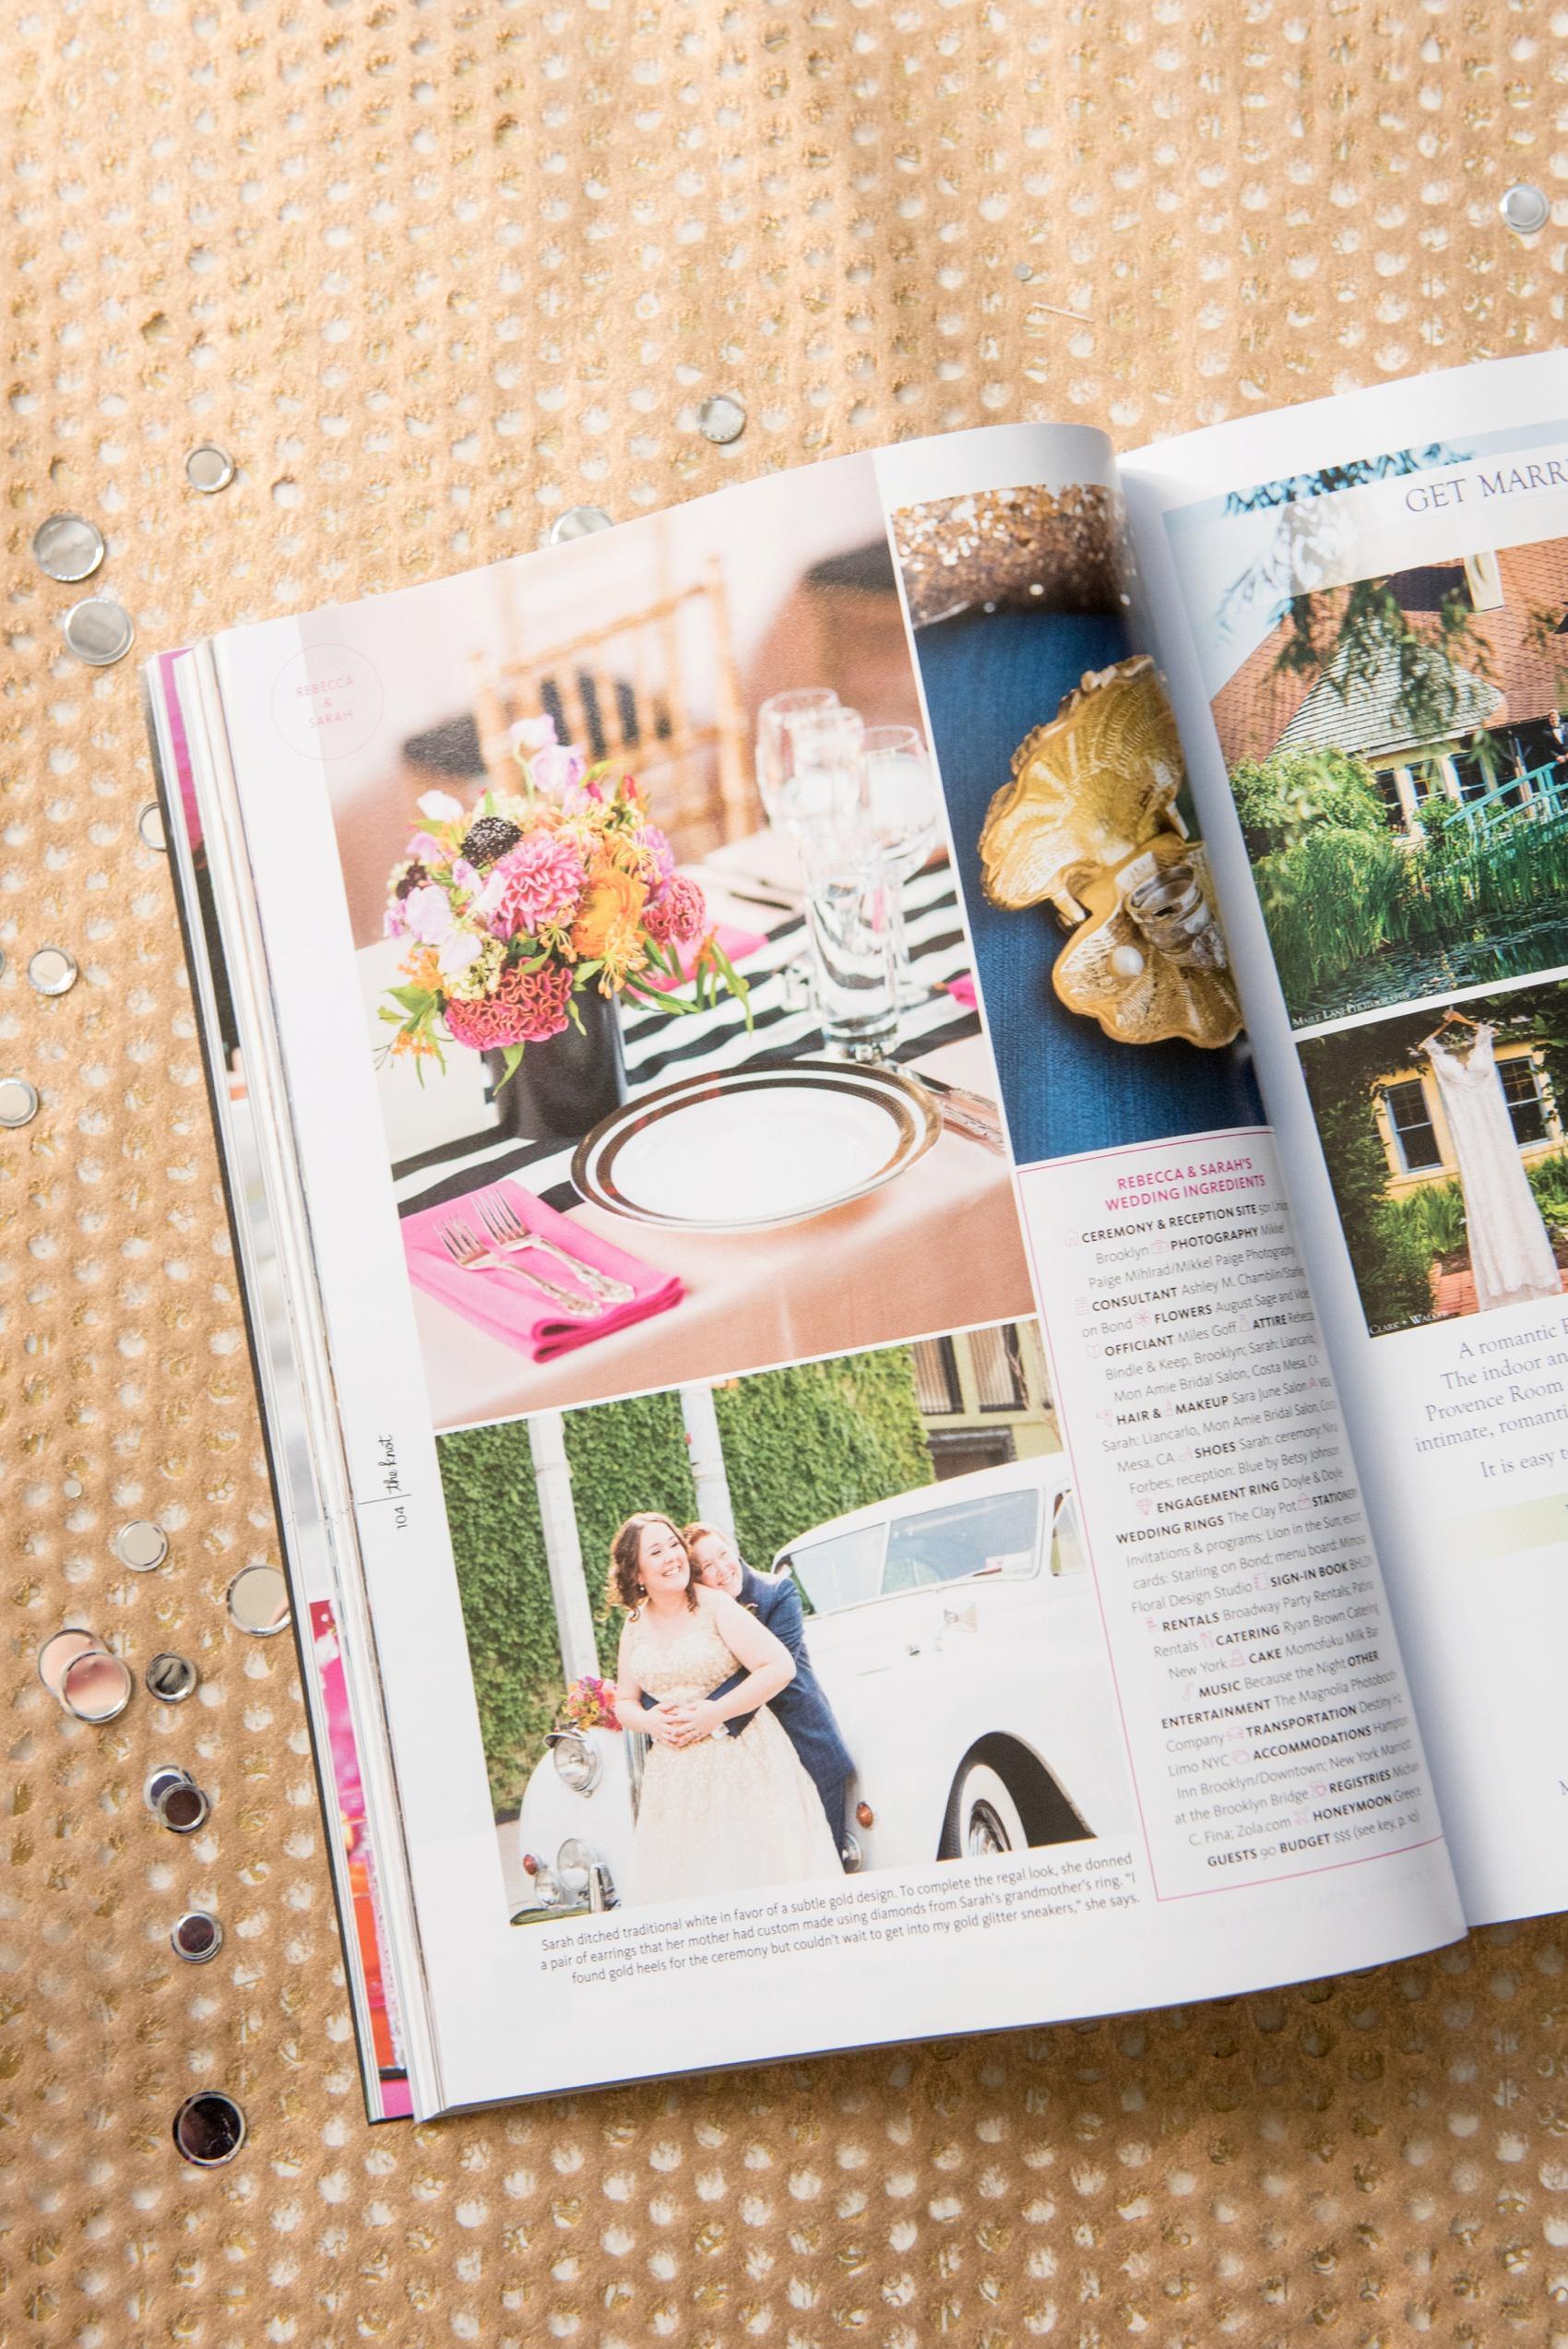 Mikkel Paige Photography 501 Union New York wedding feature in The Knot. 